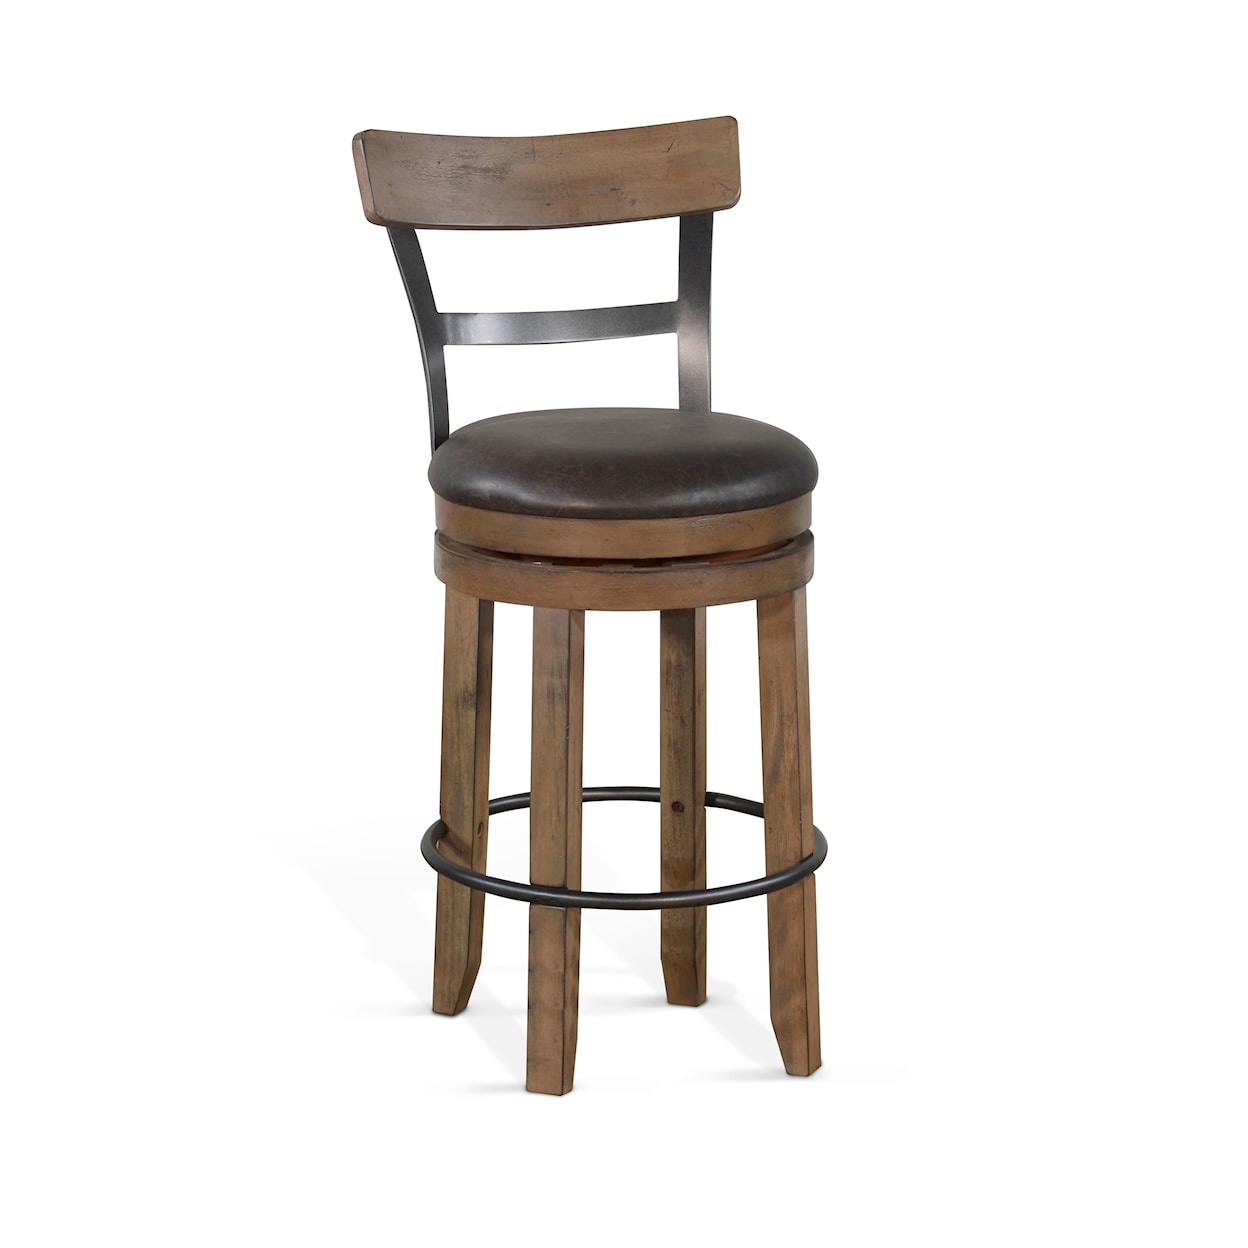 Sunny Designs Doe Valley Swivel Barstool with Back